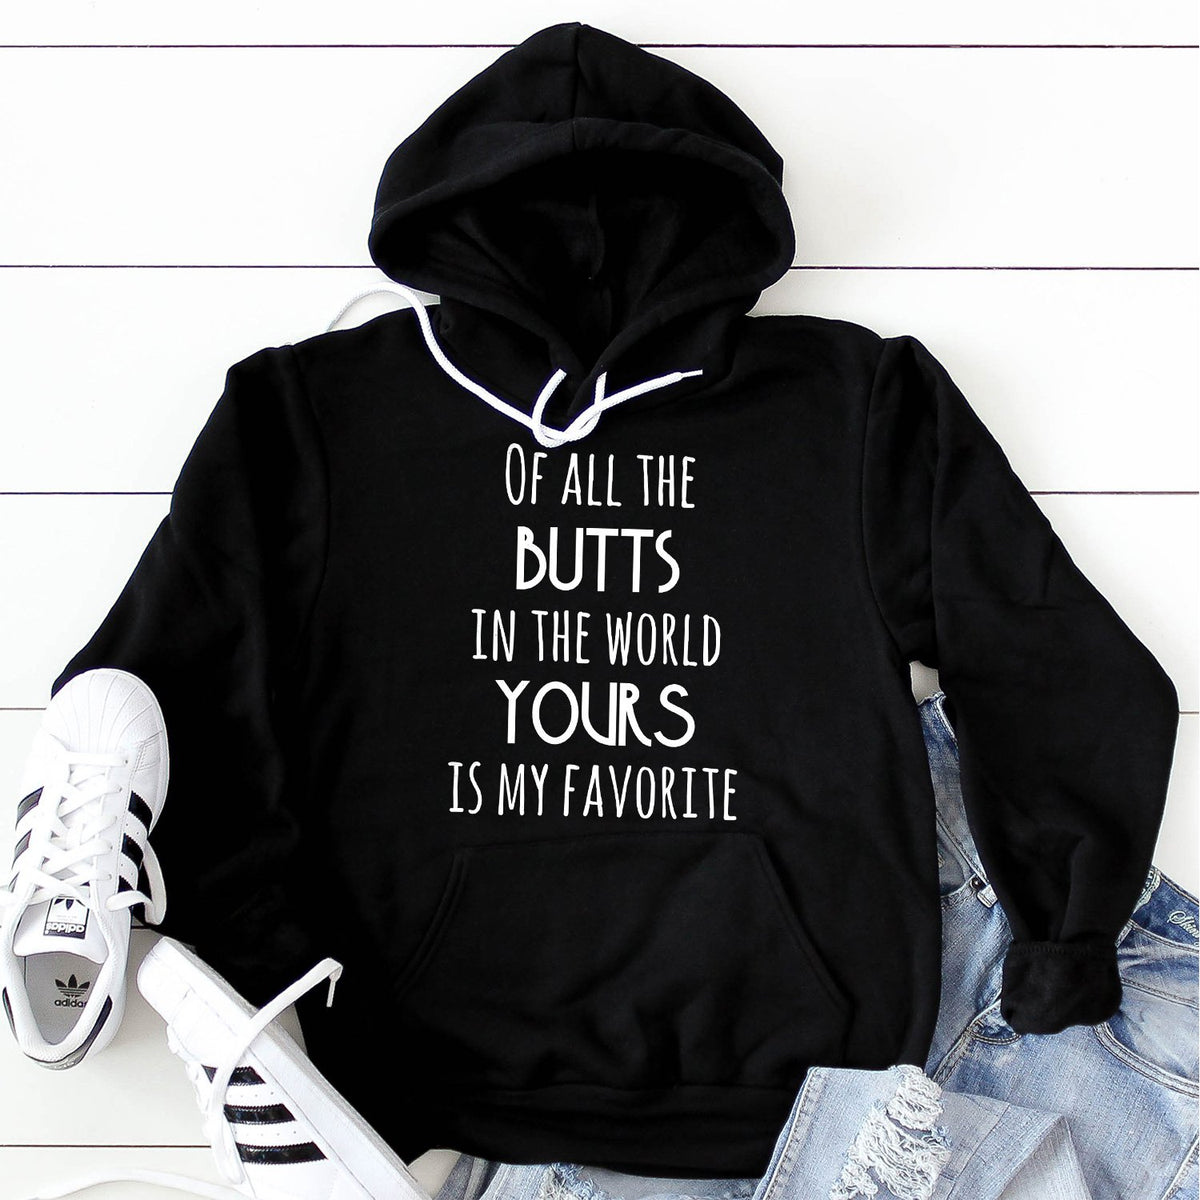 Off All the Butts in the World Yours is My Favorite - Hoodie Sweatshirt